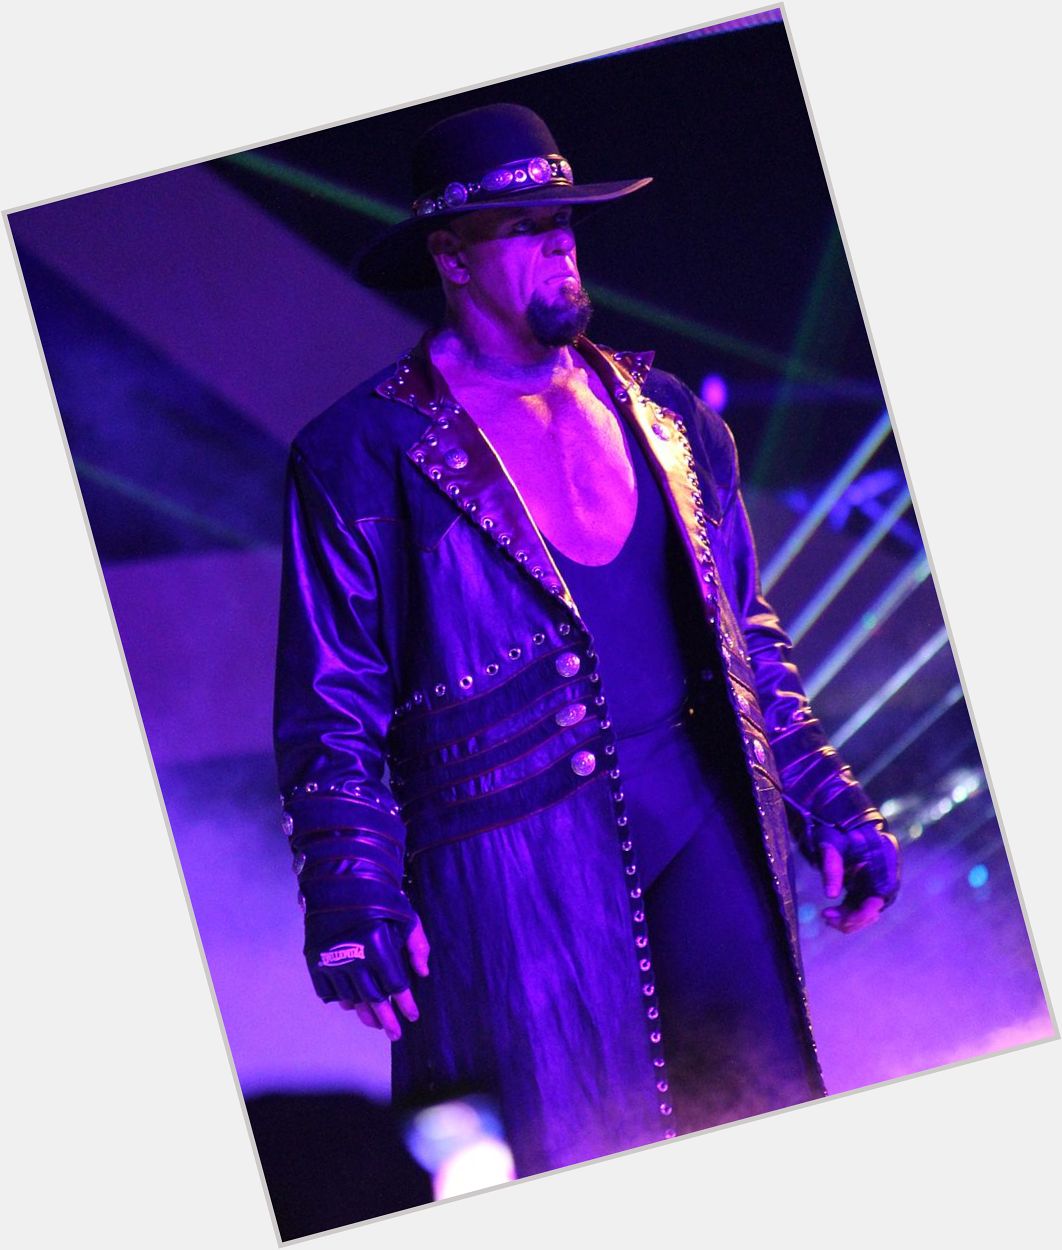 Happy 50th birthday to a legend: The Undertaker. 